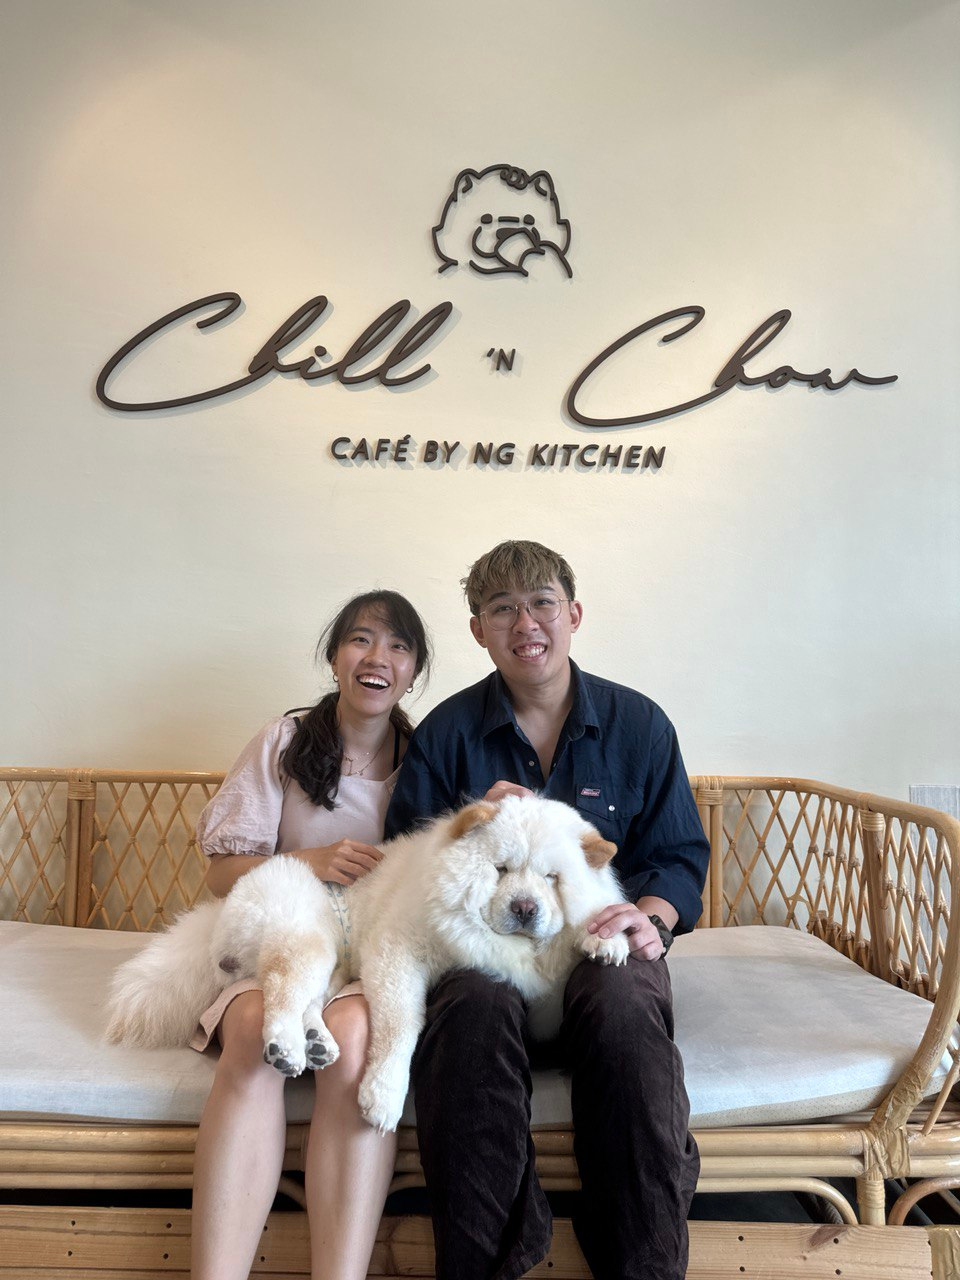 Johor bahru itinerary - chill n chow cafe